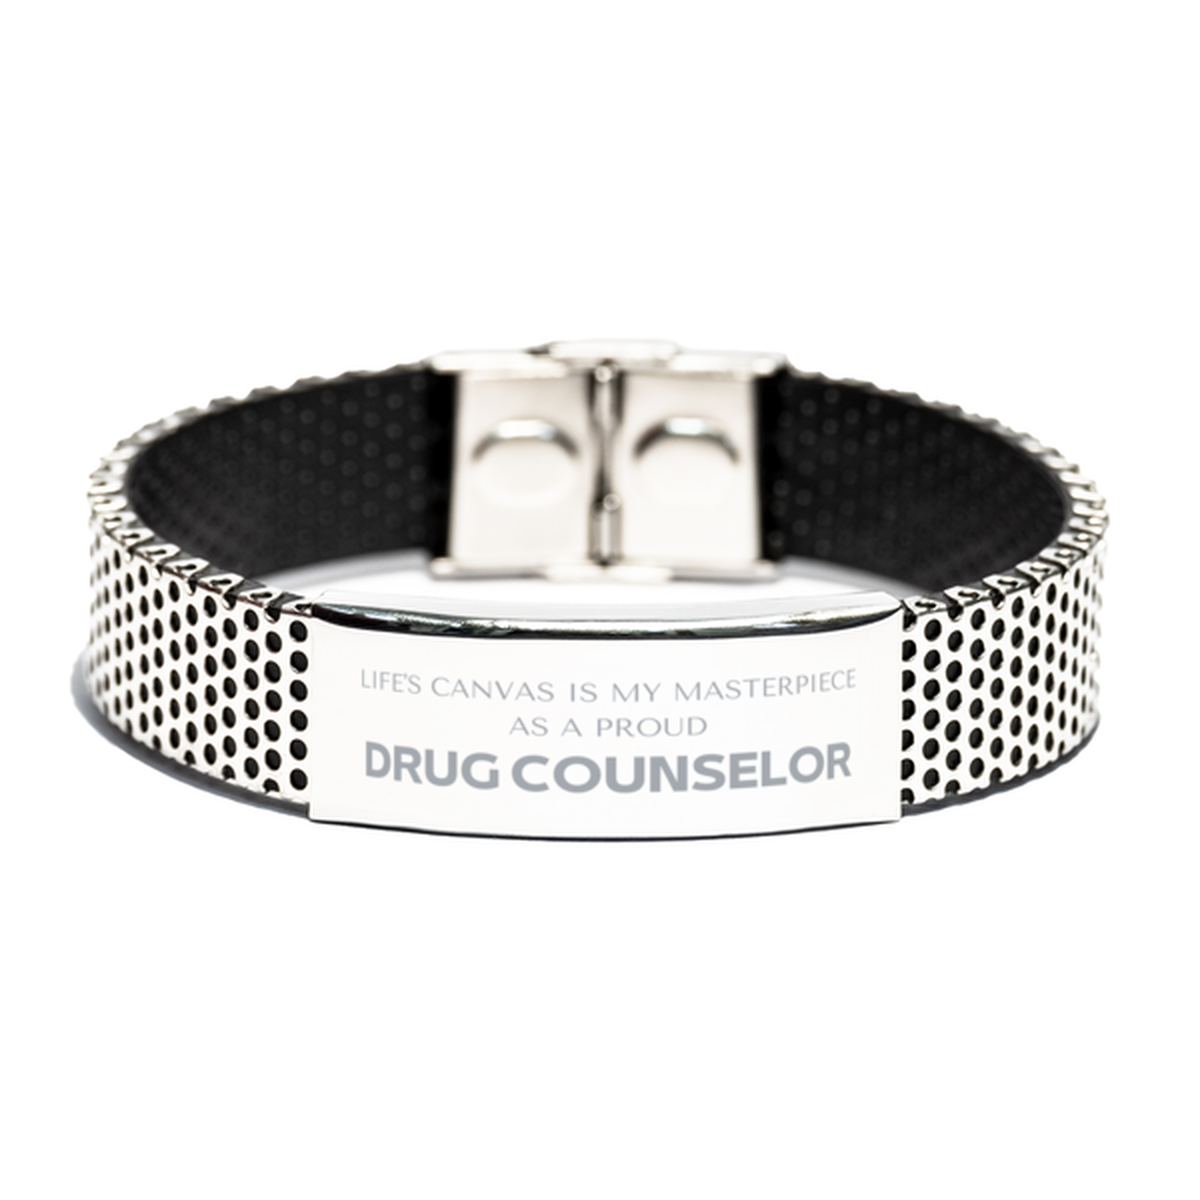 Proud Drug Counselor Gifts, Life's canvas is my masterpiece, Epic Birthday Christmas Unique Stainless Steel Bracelet For Drug Counselor, Coworkers, Men, Women, Friends